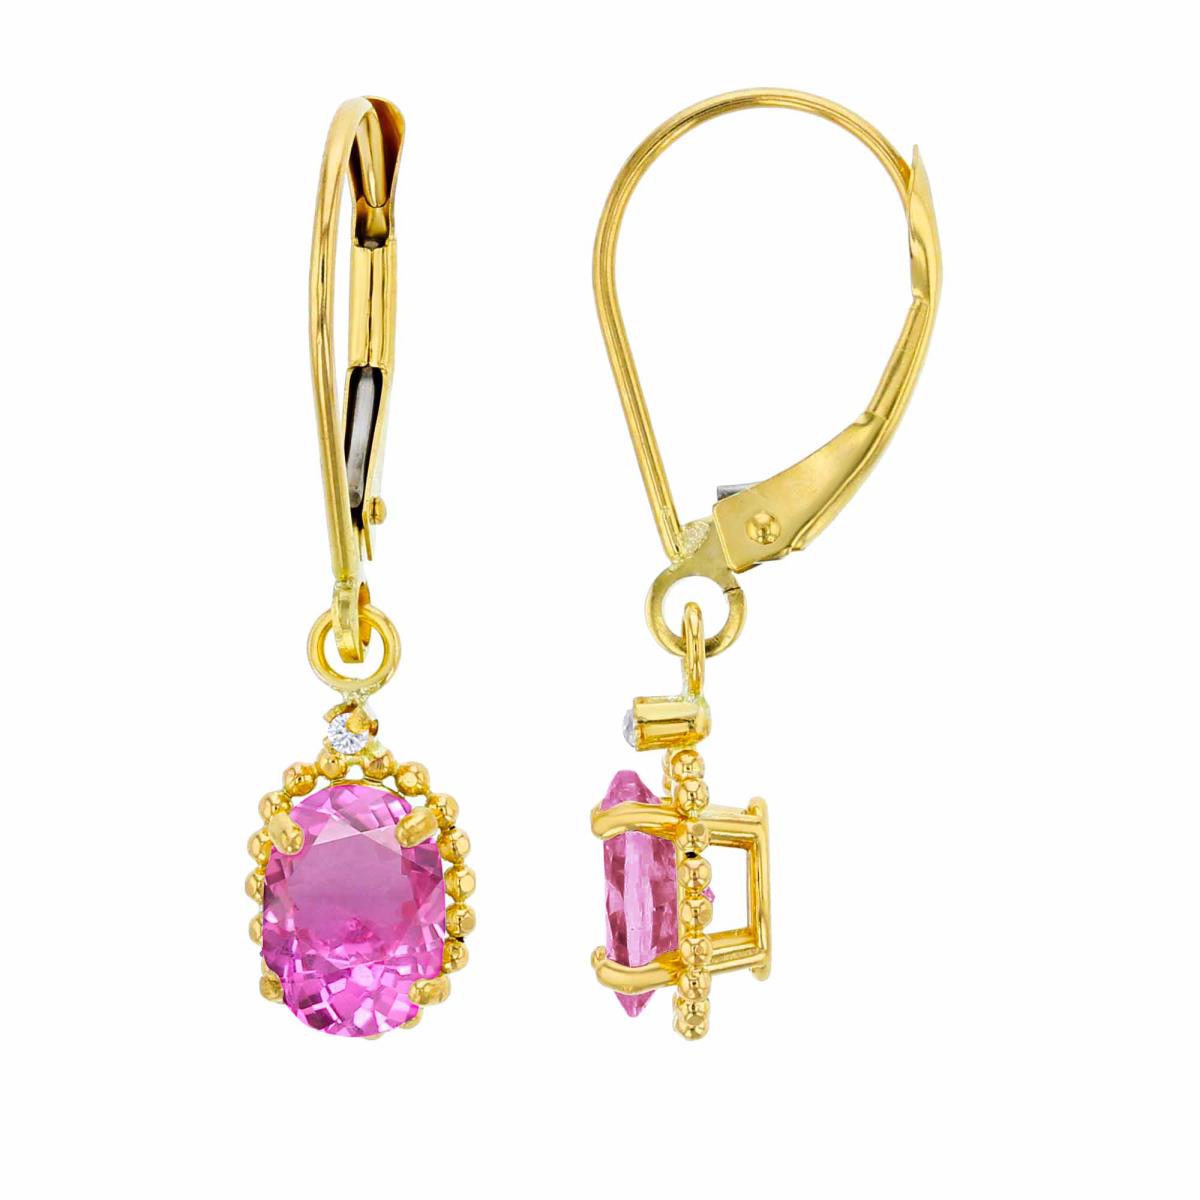 10K Yellow Gold 1.25mm Rd White Topaz & 6x4mm Ov Created Pink Sapphire Bead Frame Drop Lever-Back Earring